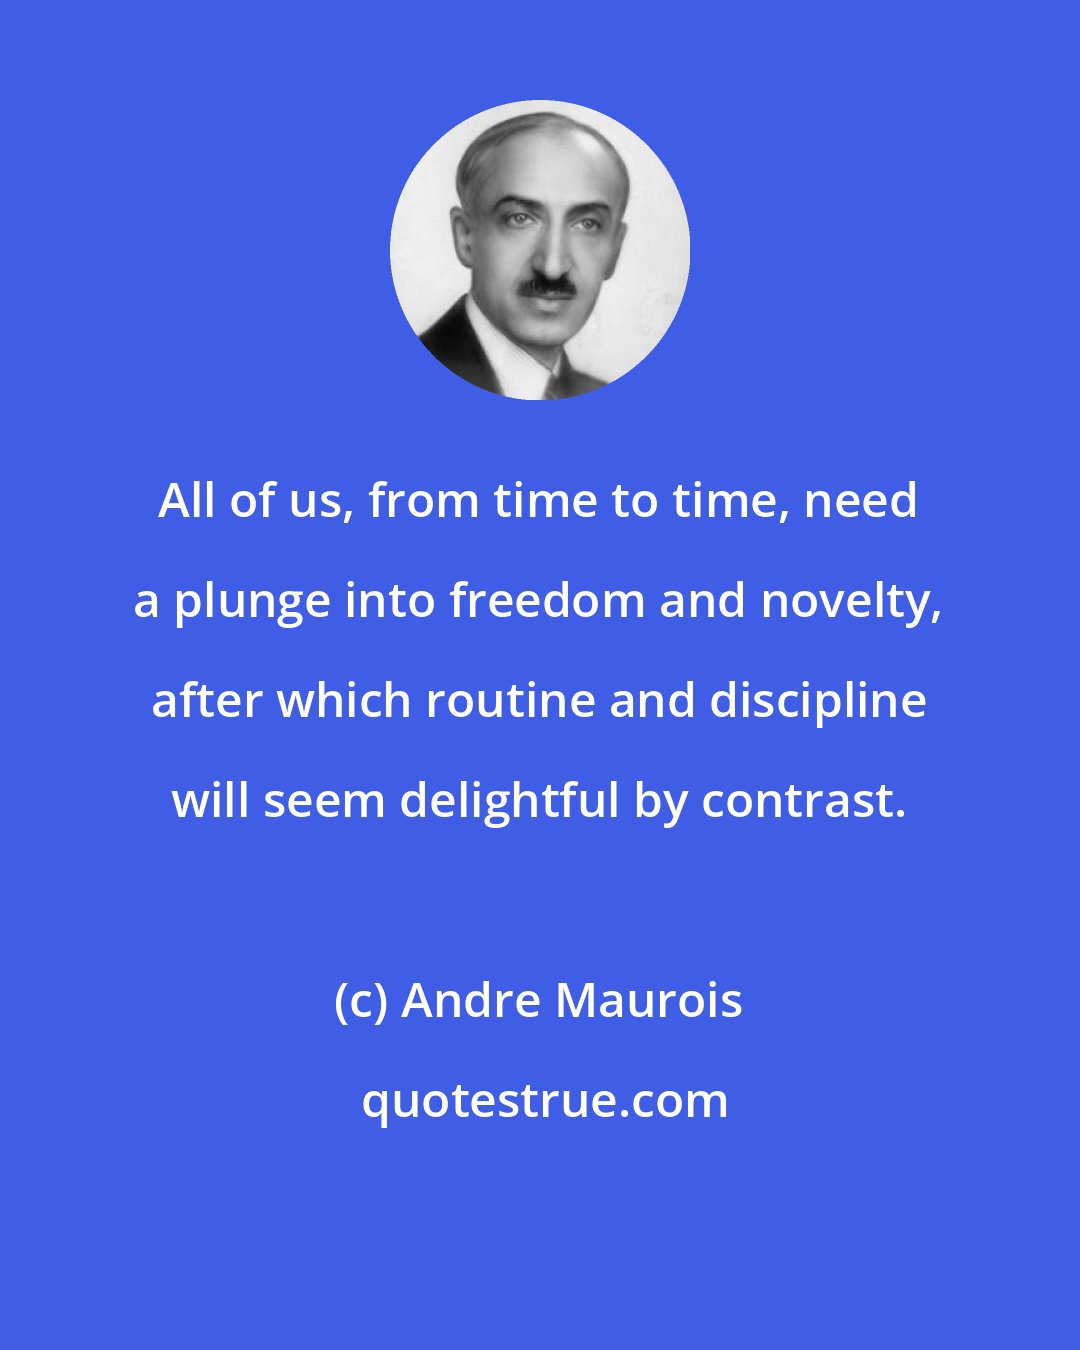 Andre Maurois: All of us, from time to time, need a plunge into freedom and novelty, after which routine and discipline will seem delightful by contrast.